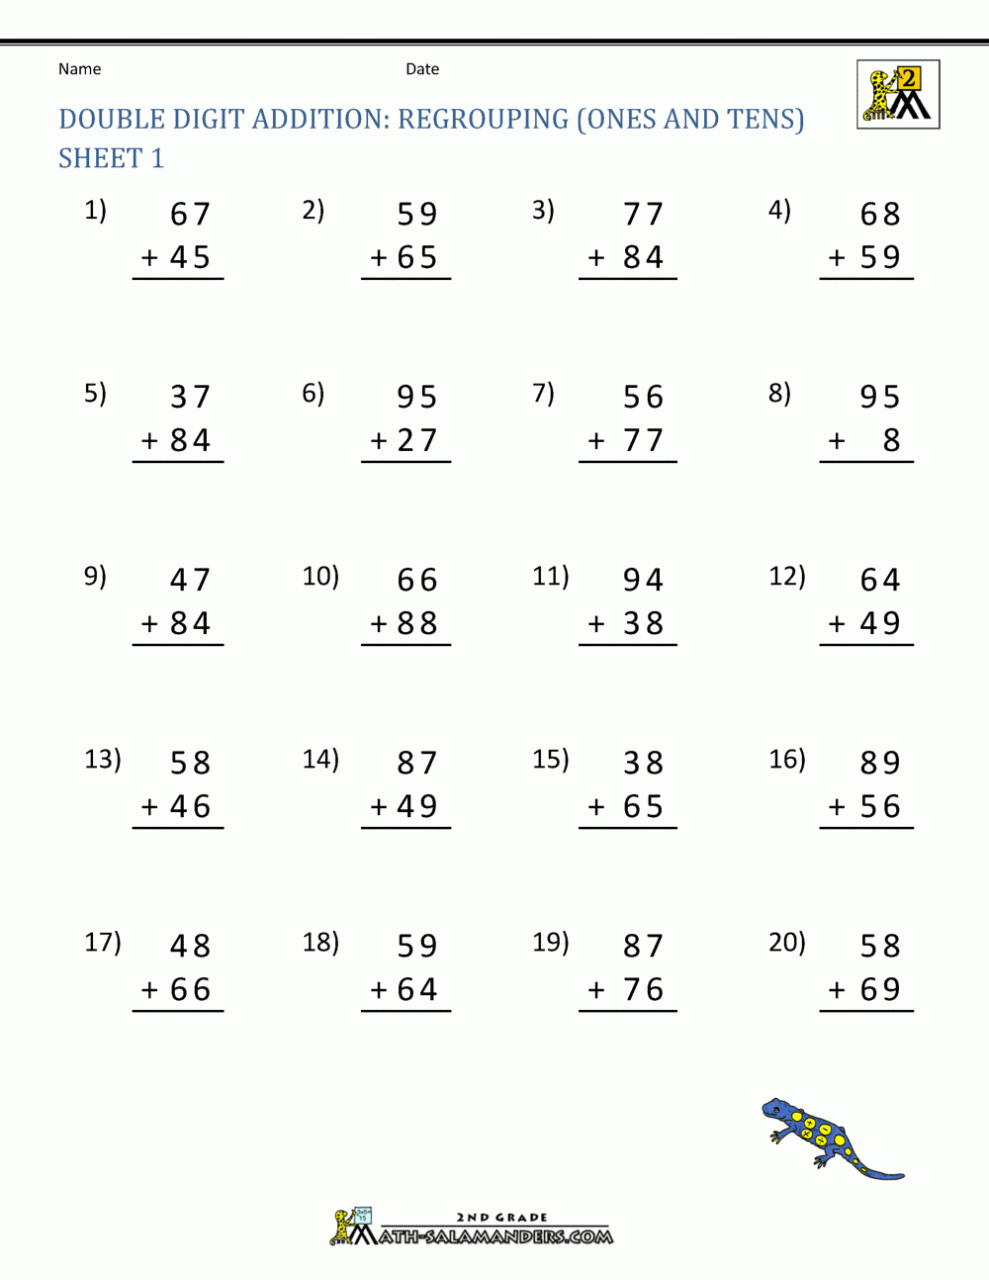 Add And Subtract Mixed Numbers With Unlike Denominators Worksheet Pdf